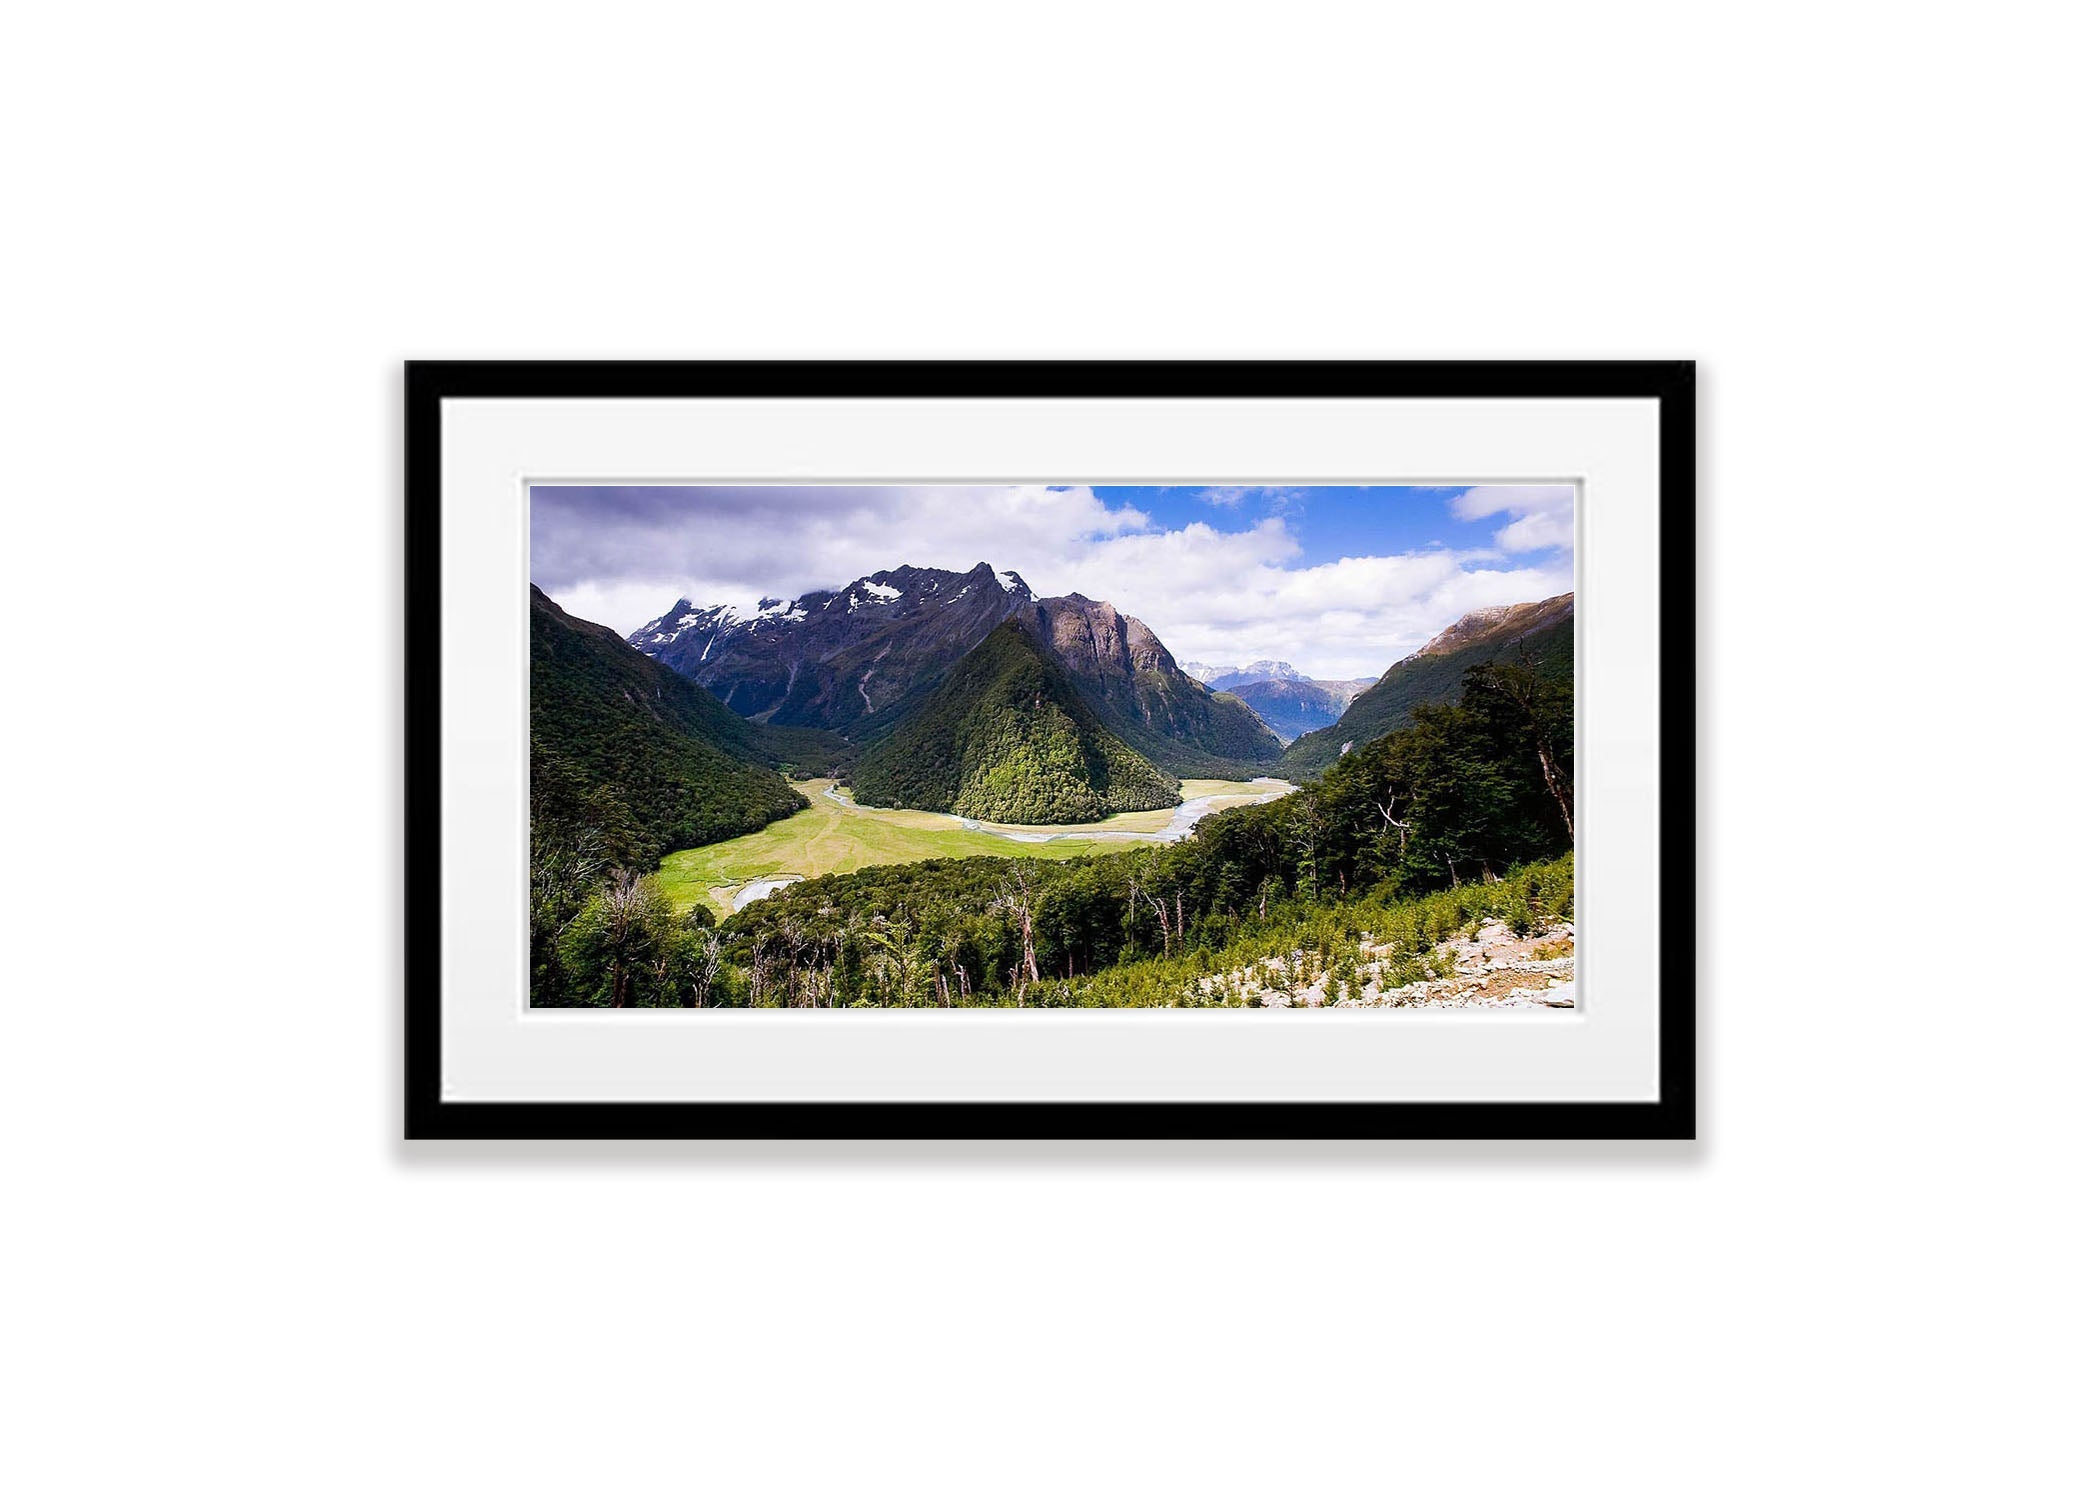 The Routeburn Valley, Routeburn Track - New Zealand